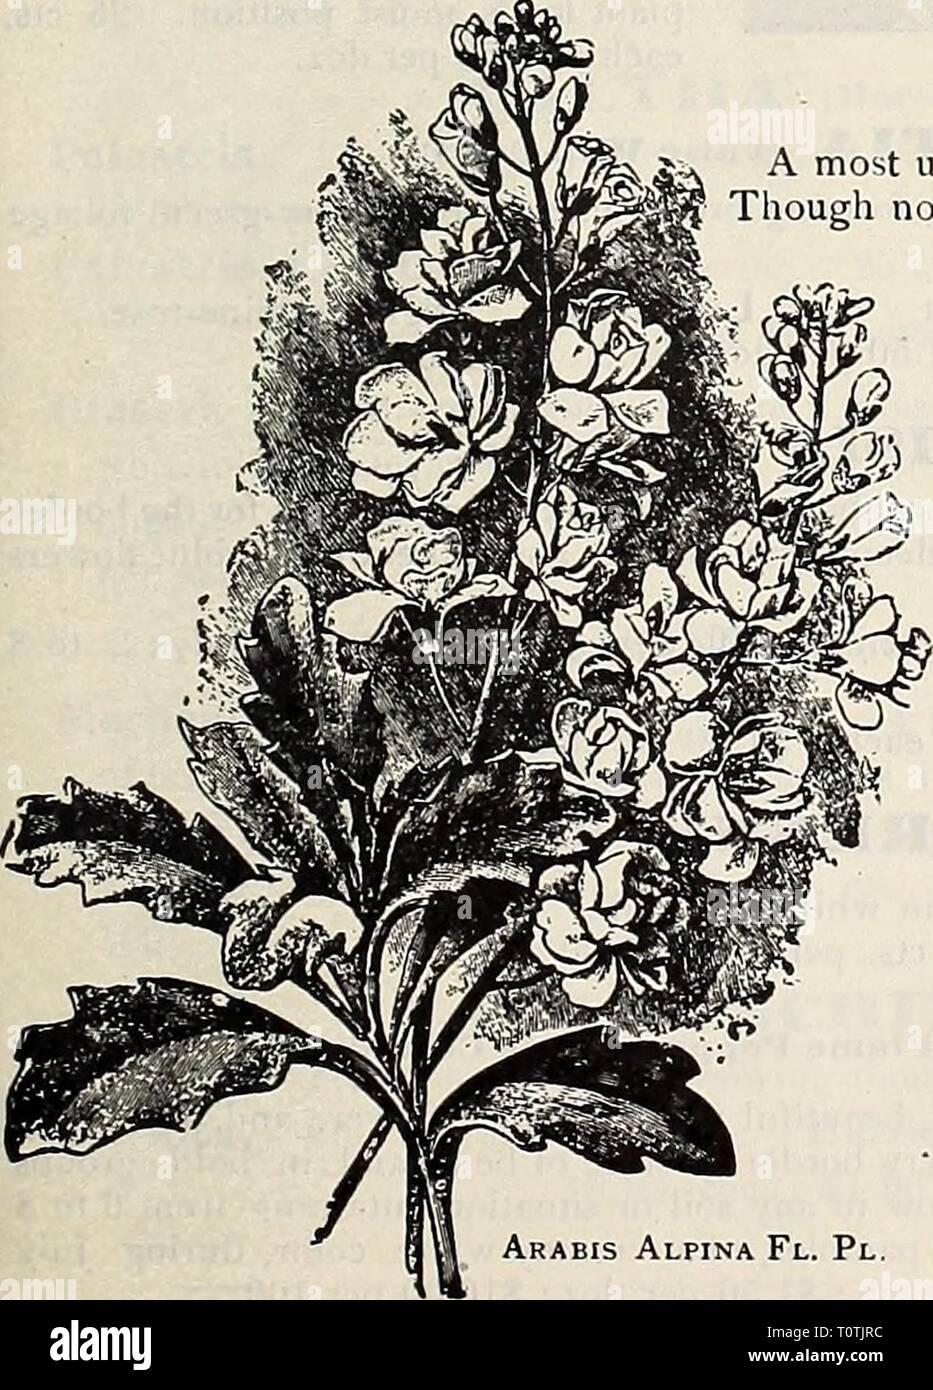 Dreer's 1907 garden book (1907) Dreer's 1907 garden book  dreers1907garden1907henr Year: 1907  ARABIS (Bock Cress). Alpina. One of the most desirable of the very early spring- flowering plants that is especially adapted for edging and for the rock garden, but which succeeds equally well in the border, where it forms a dense carpet, completely covered with pure white flowers. — FIore=plena. A distinct and pretty double-flowering form of the above. (See cut ) 15 cts. each; $1.50 per doz.; $10.00 per 100. Collections of Hardy Perennial Plants. For the amateur who is not acquainted with the variou Stock Photo